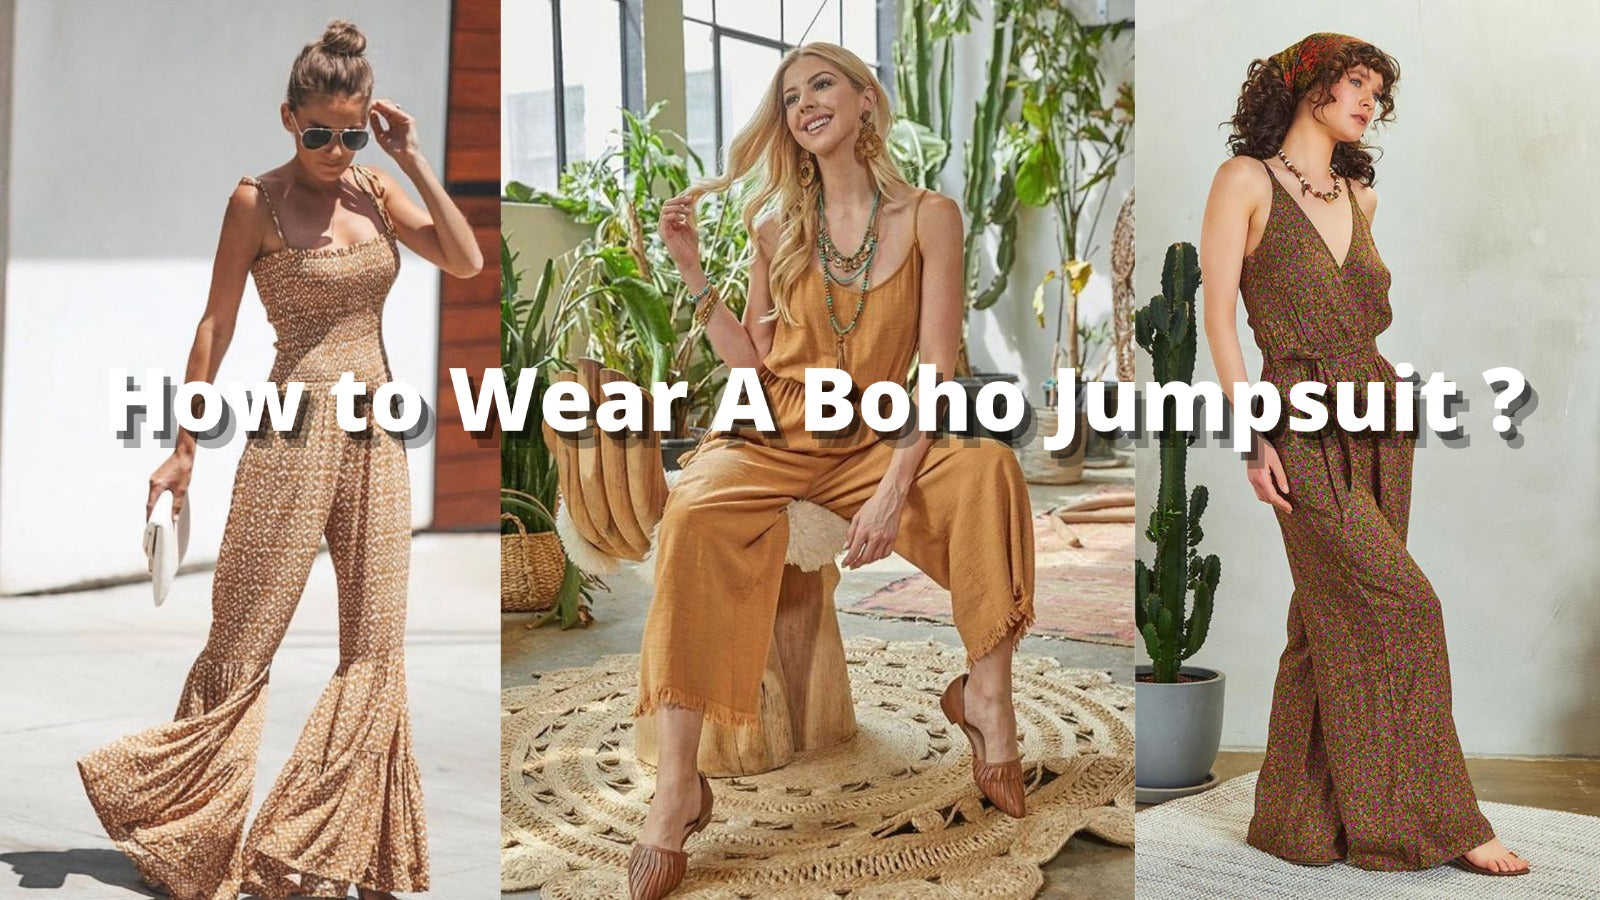 How to Wear A Boho Jumpsuit ?